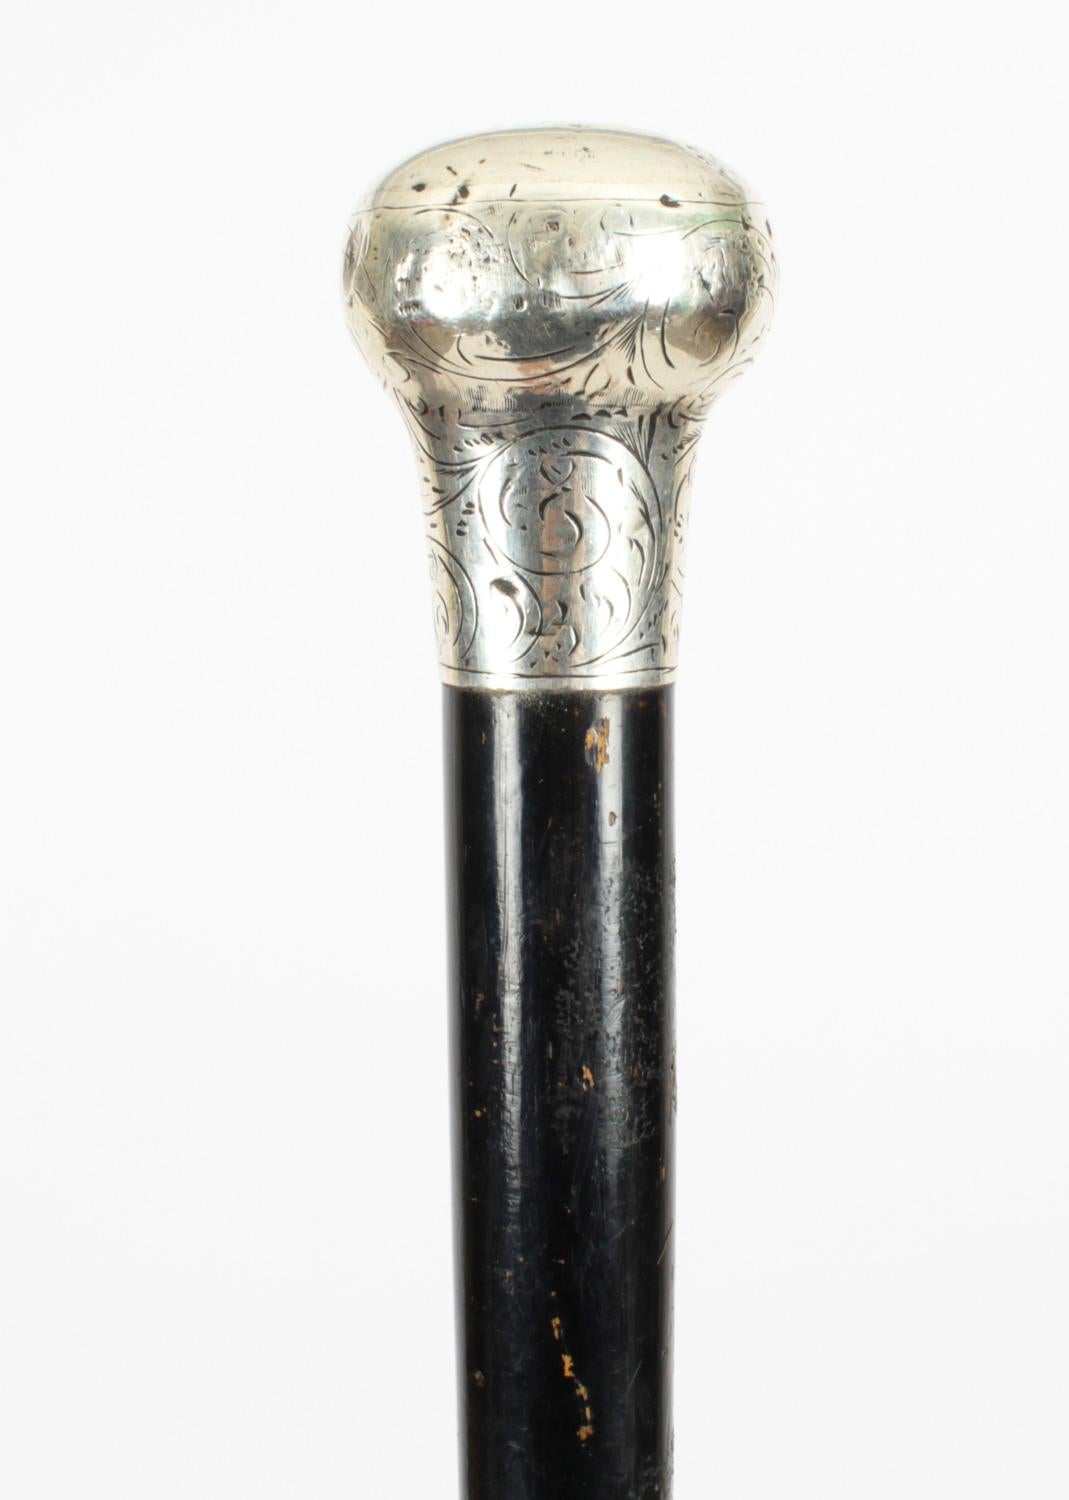 This is a beautiful antique Victorian sterling silver pommel and ebonised shaft walking stick with hallmarks for Birmingham, dated 1871.
 
This decorative walking cane features an exquisite cast silver pommel with engraved decoration. It has a